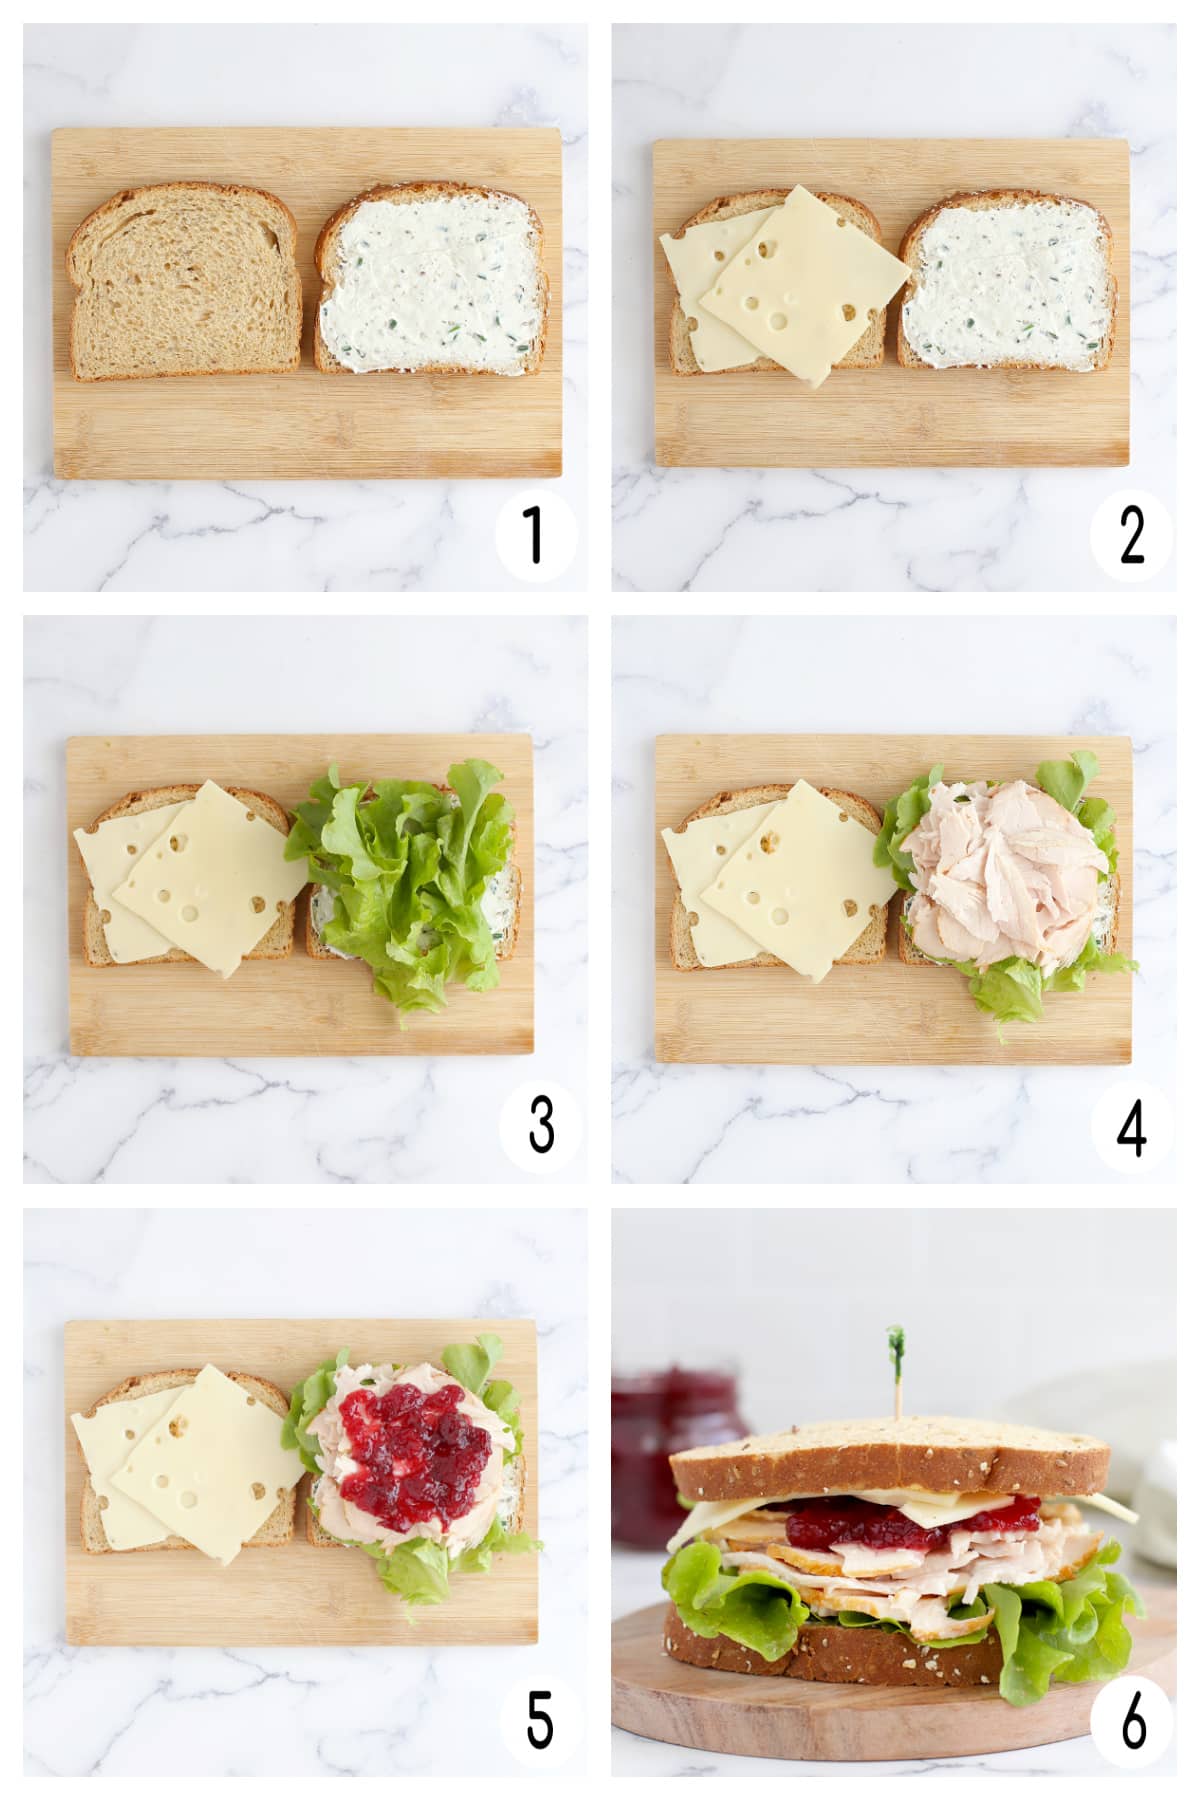 Process shots showing how to make cranberry turkey sandwiches.